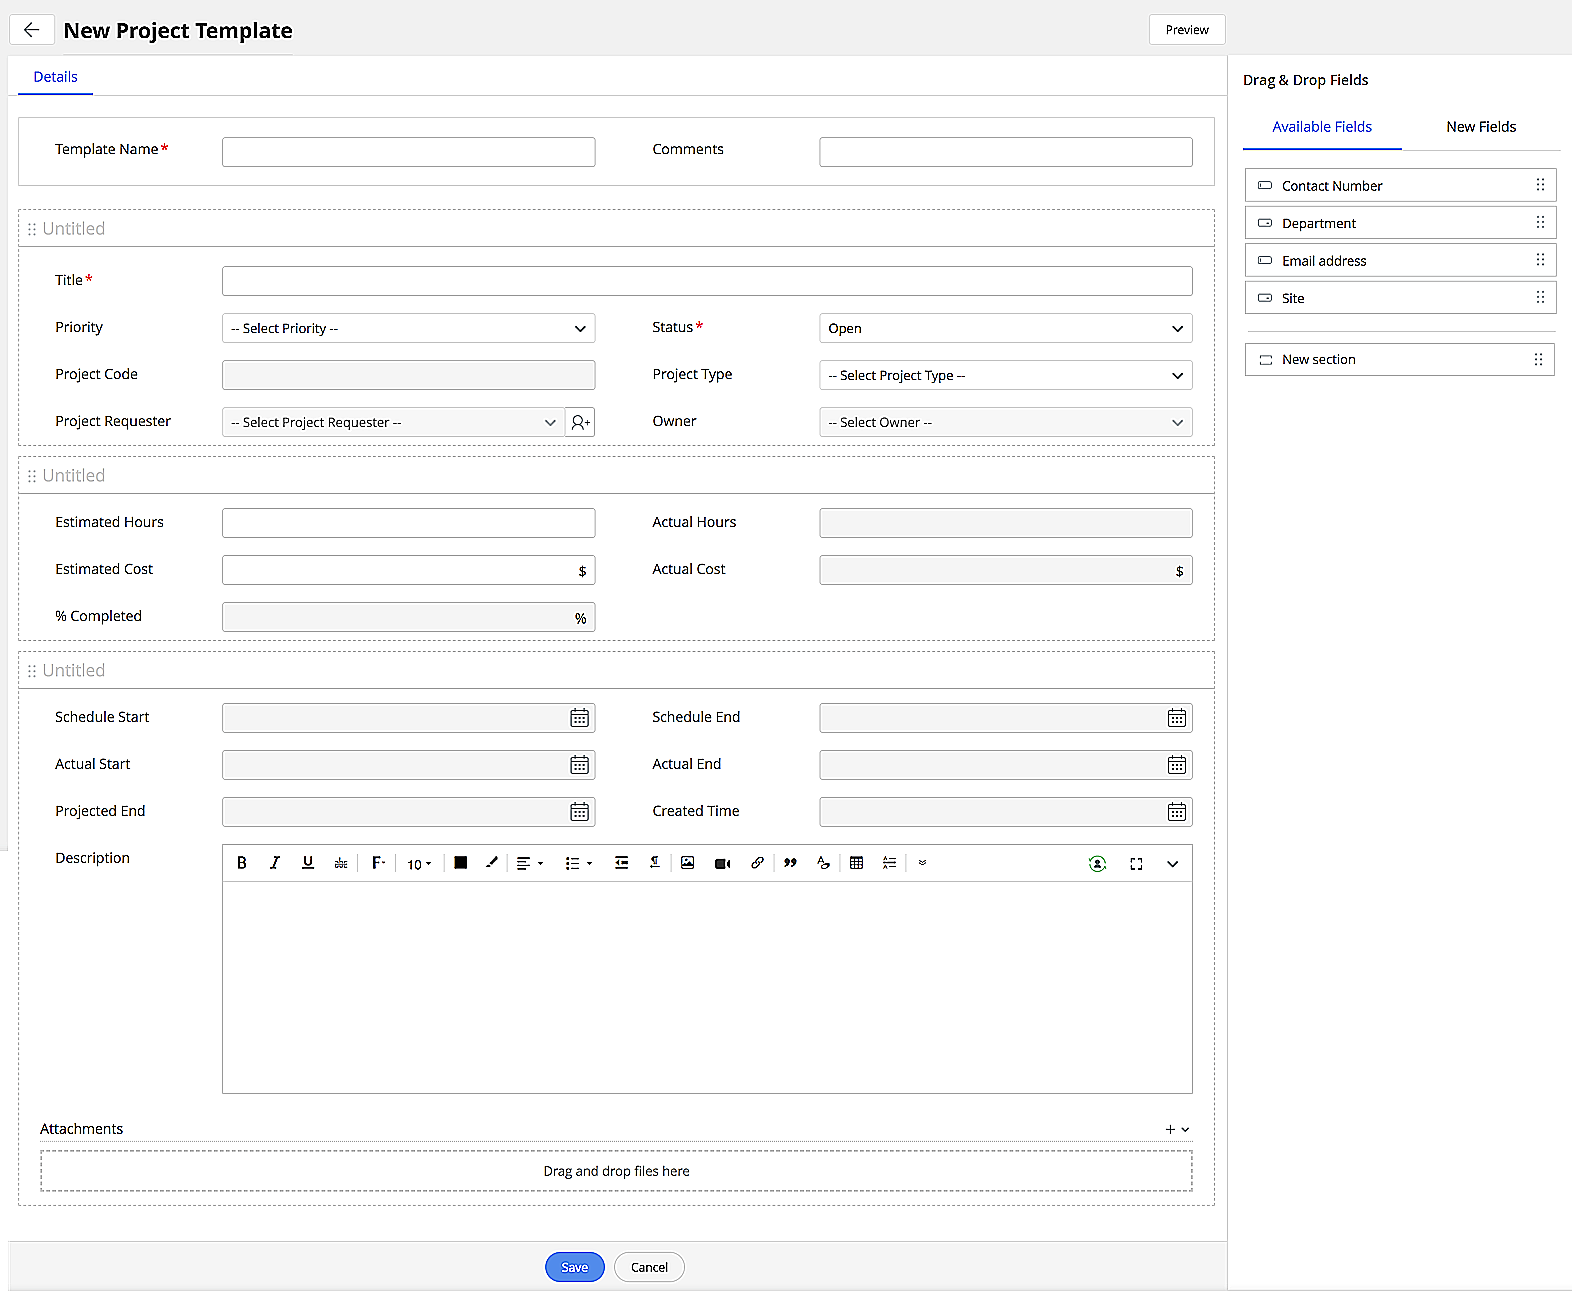 project template form is now revamped